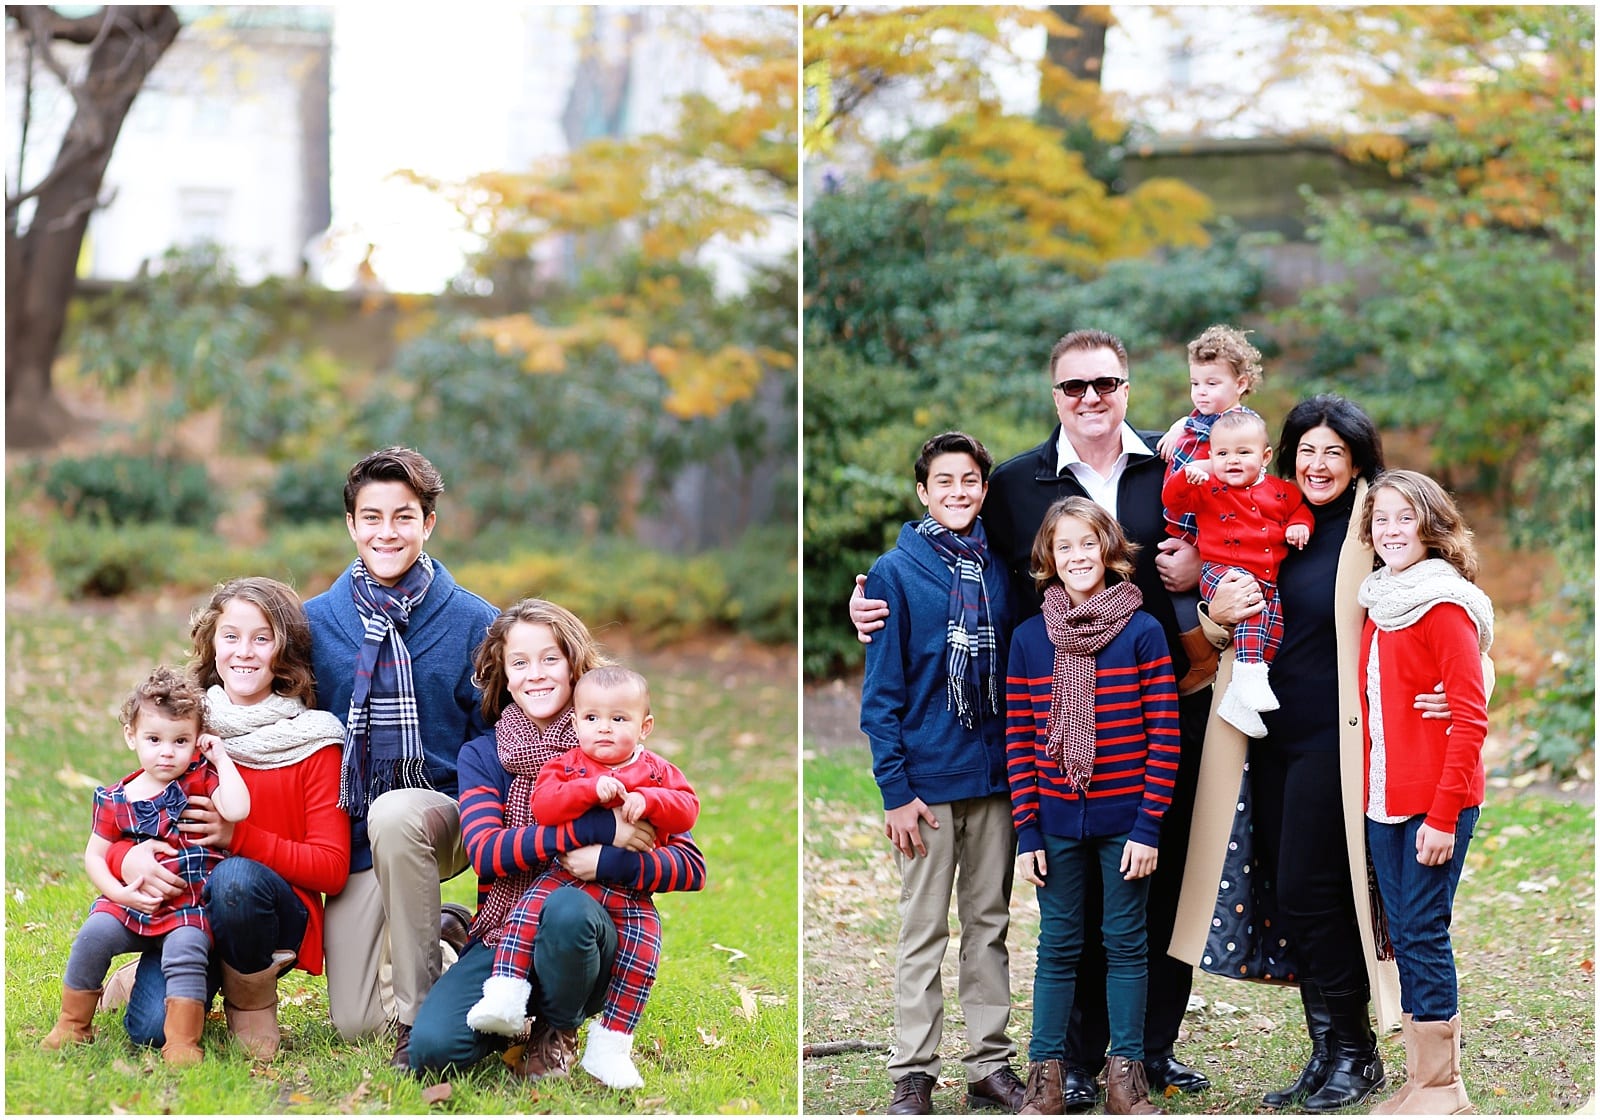 Family Christmas Photo Session in Central Park: NYC Family Photographer Helena Woods shares her tips for a successful Christmas photo session